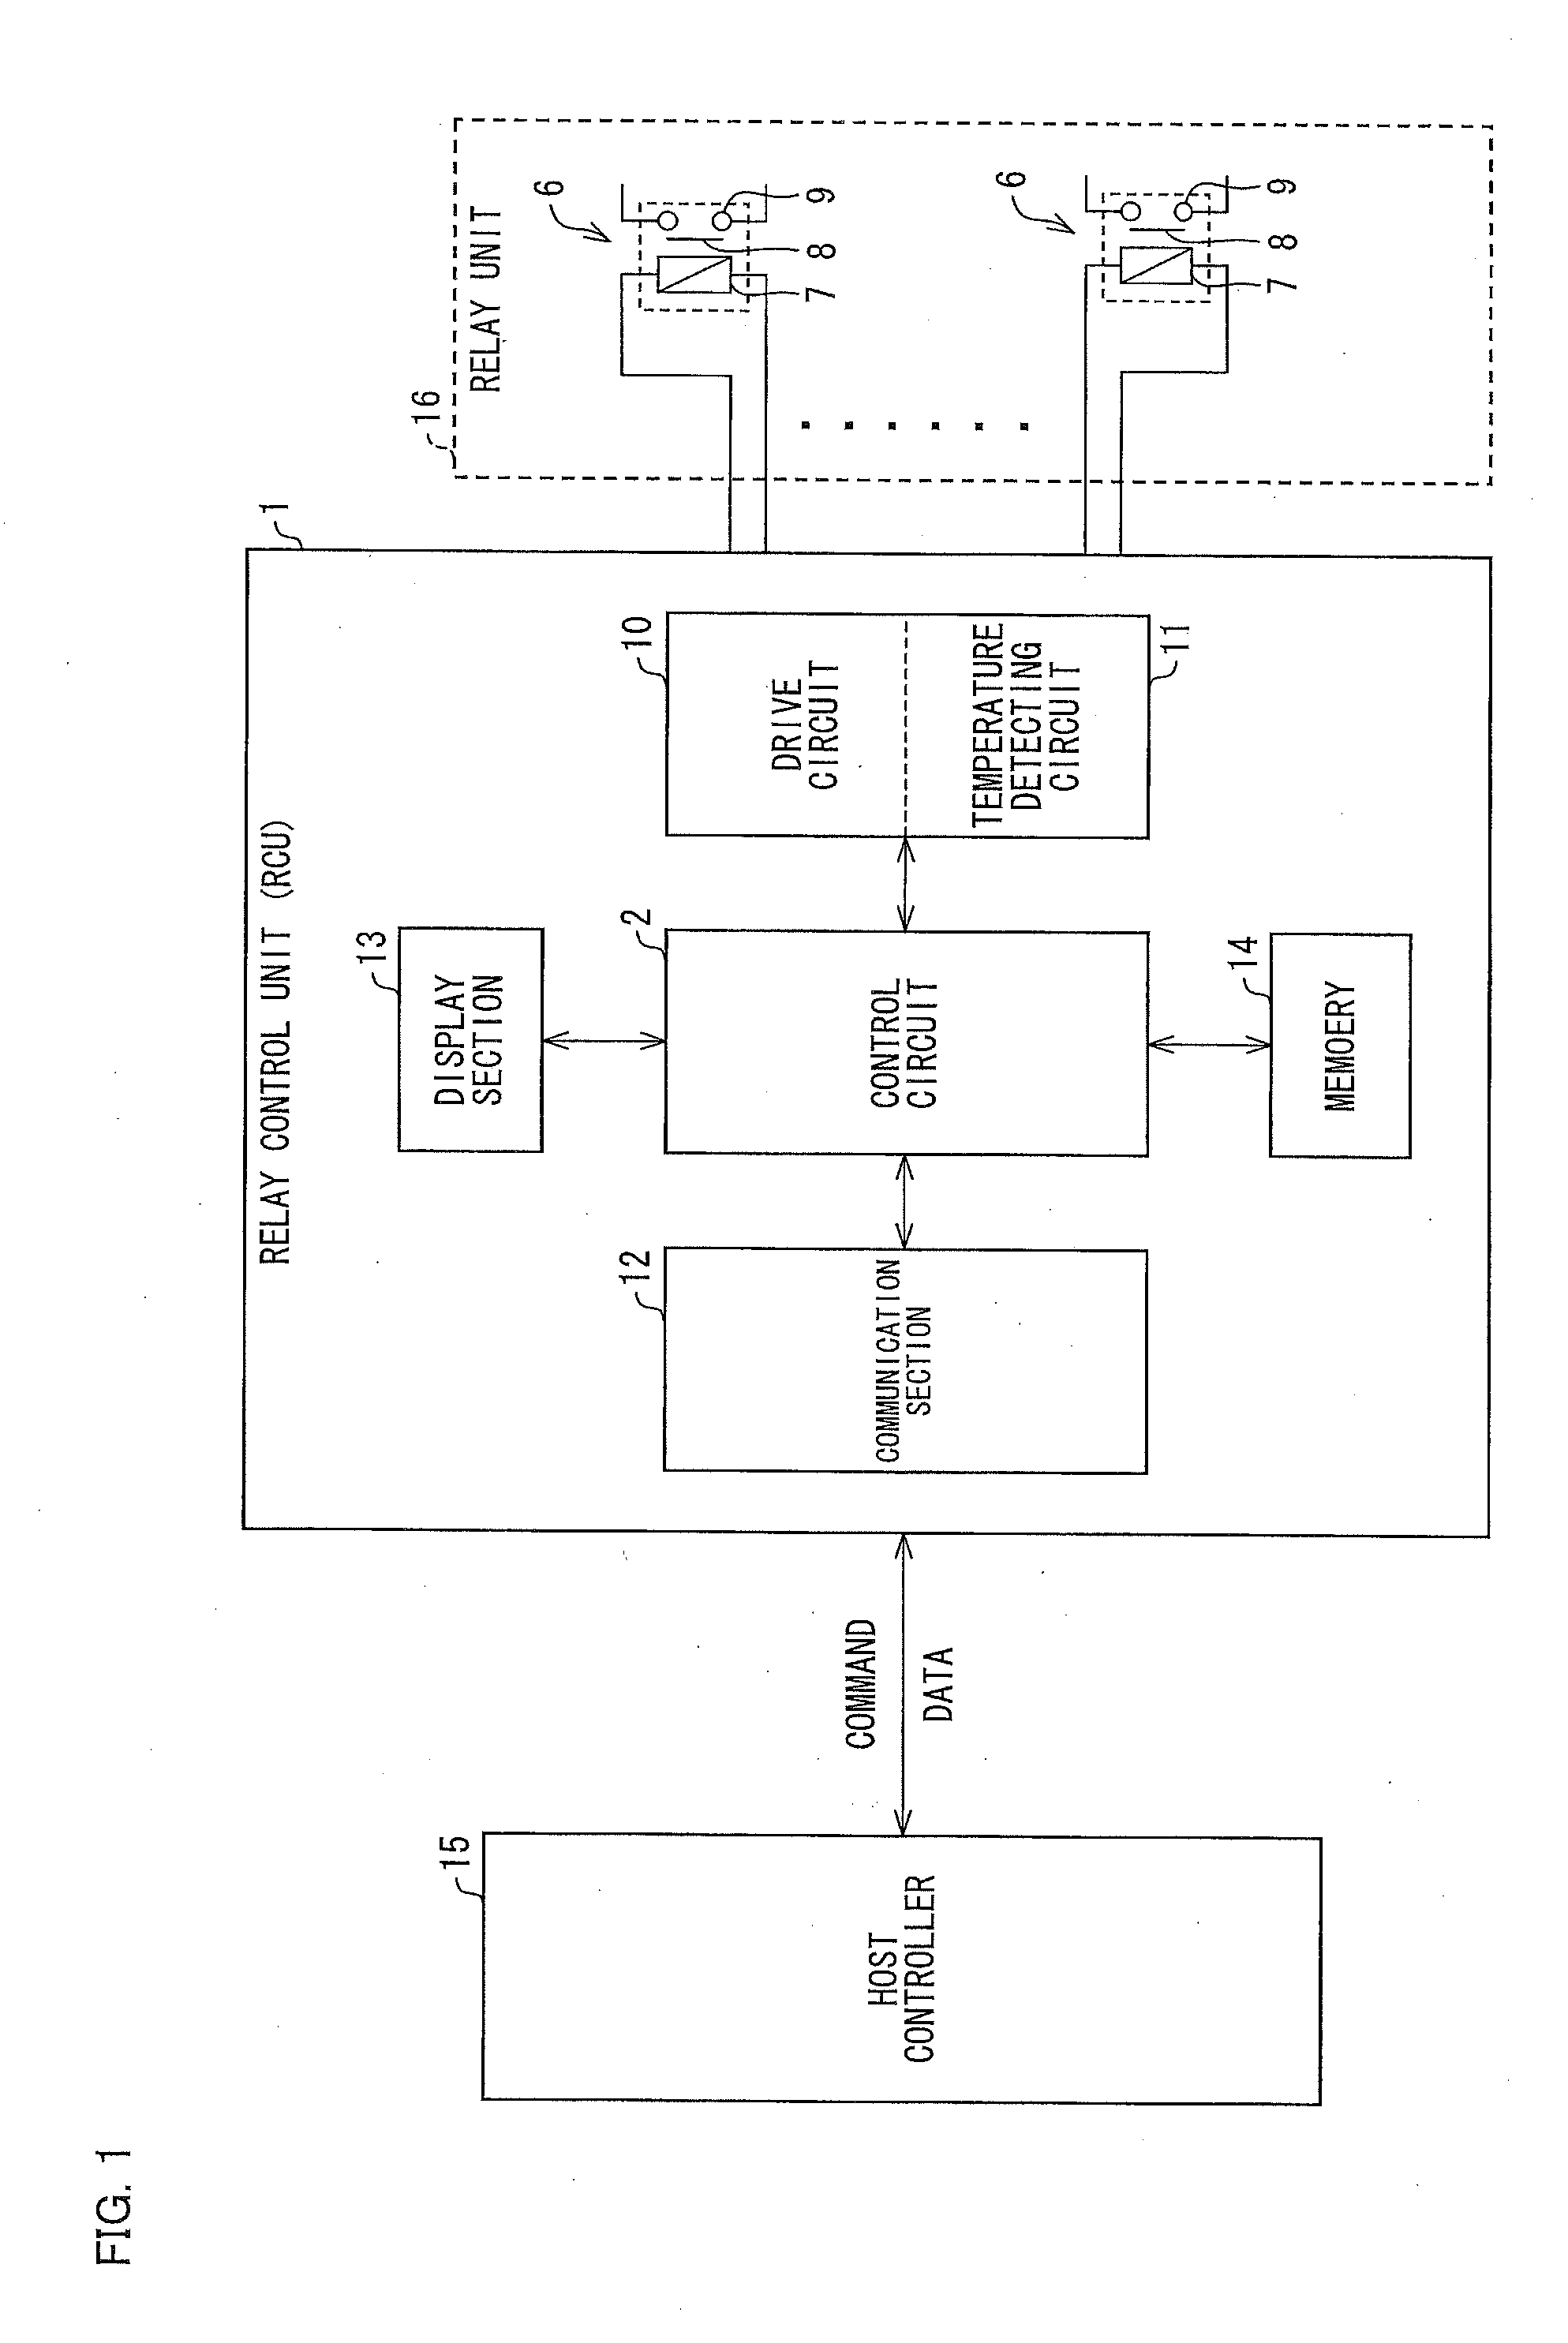 Unit for controlling electromagnetic relay, and method for controlling electromagnetic relay